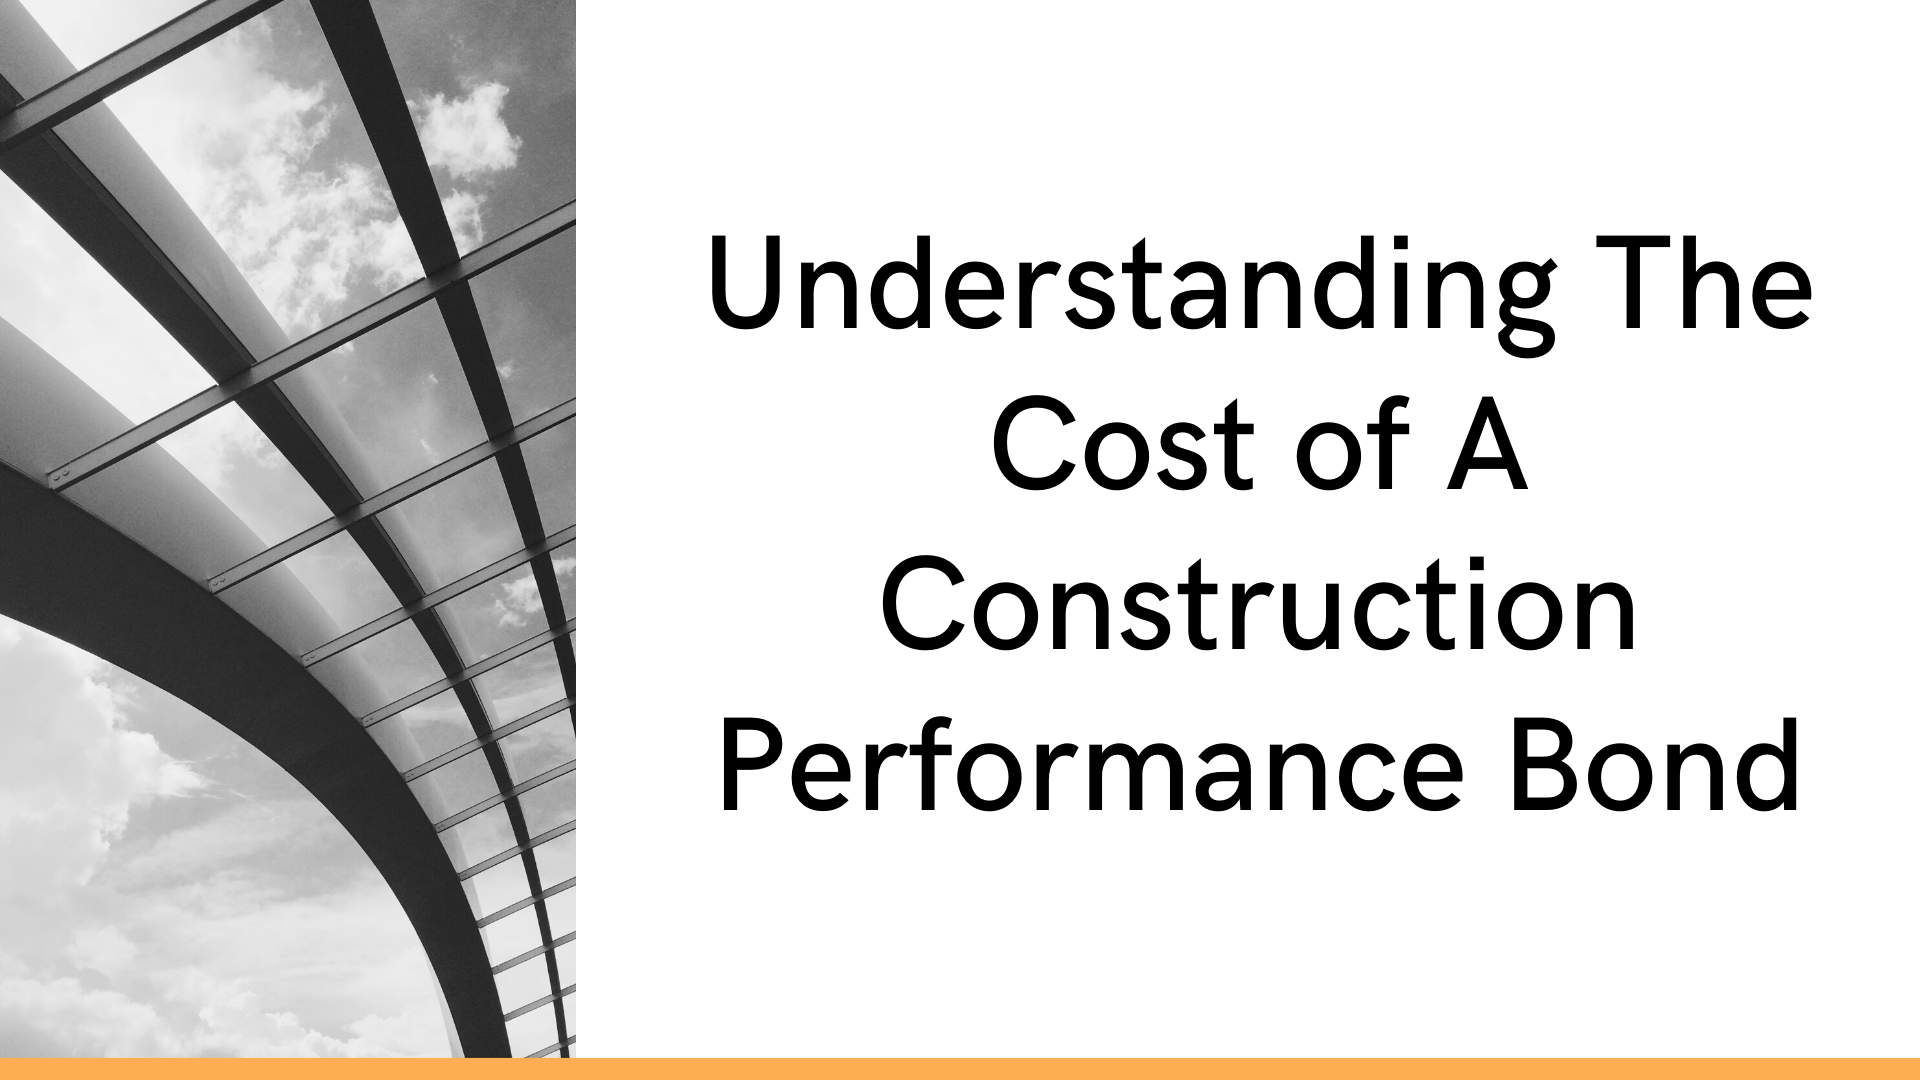 performance bond - How are performance bond costs calculated - building